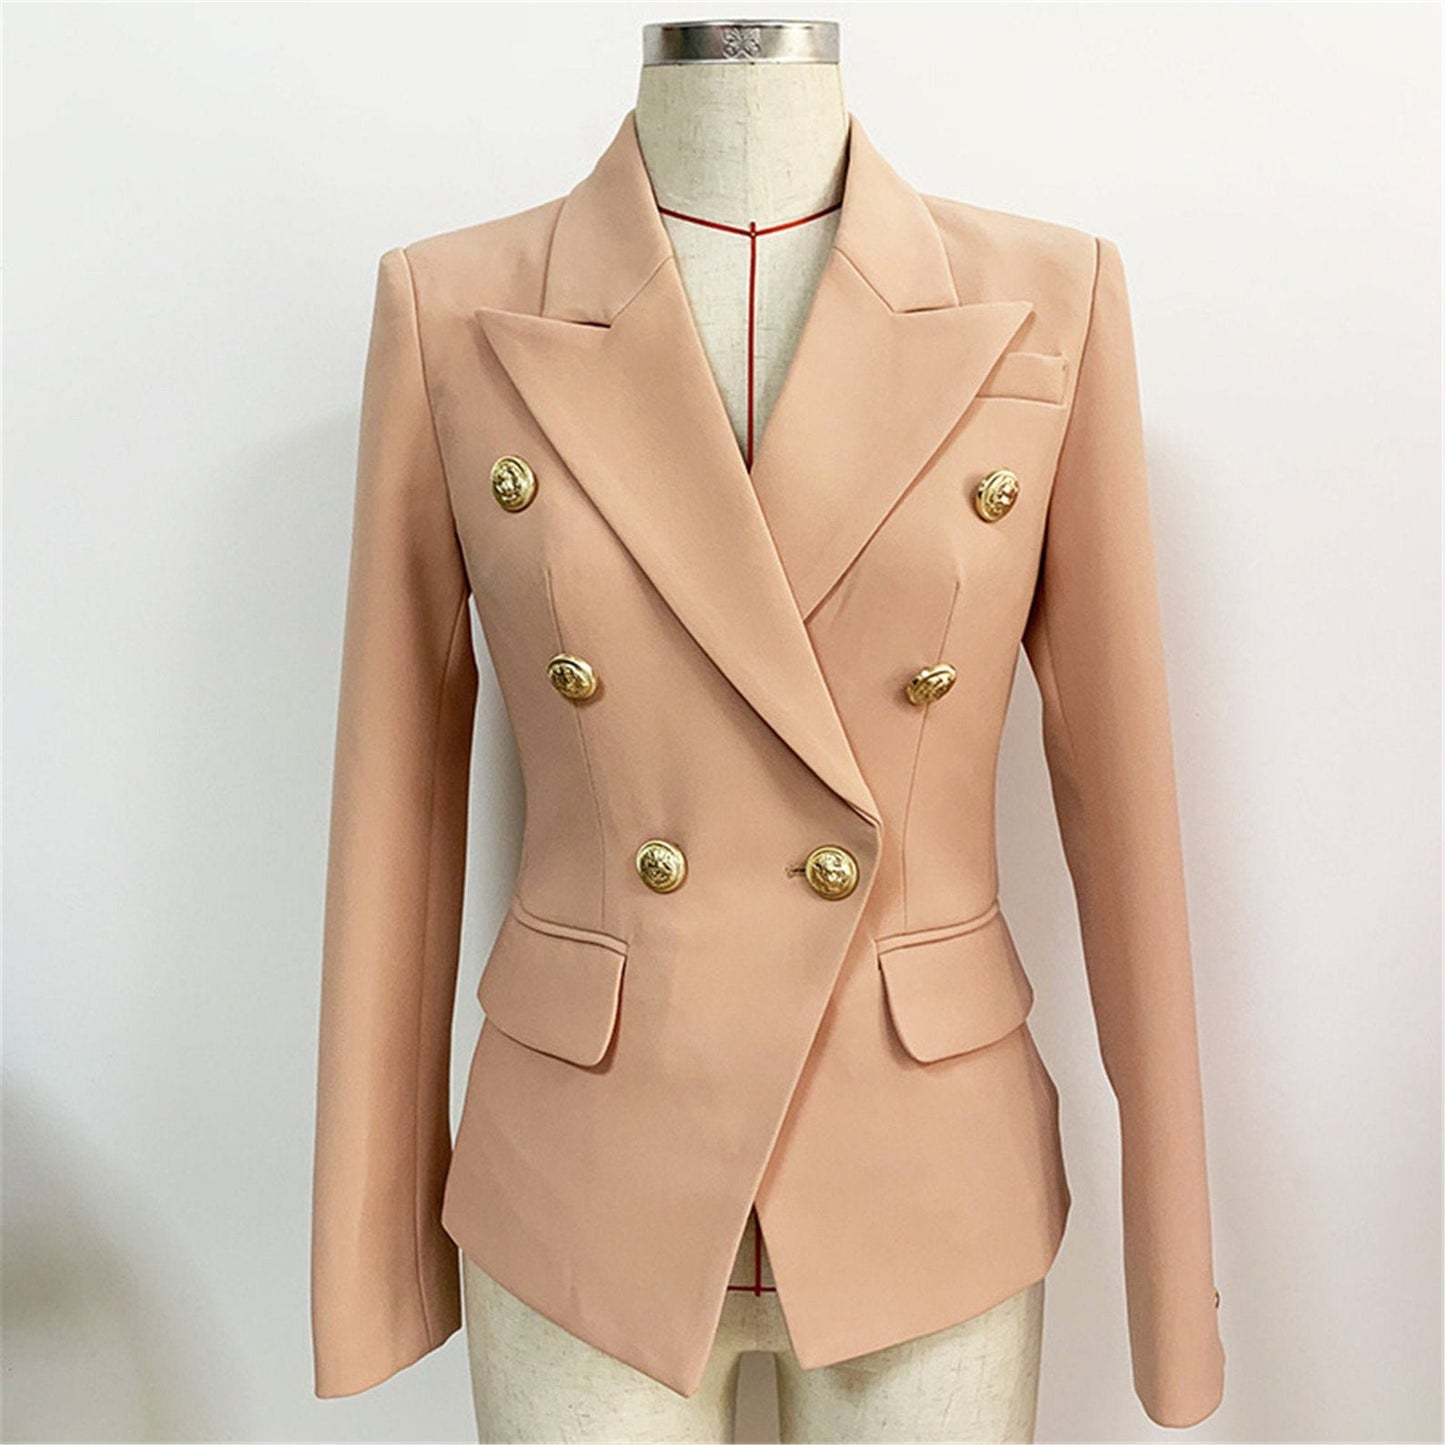 Women's Blazer Luxury Fitted Nude Pink Coat  UK CUSTOMER SERVICE!  Size: UK 4-14/ EU 32-42/ US 0-10  Women's Blazer Luxury Fitted Nude Pink Coat, it is fitted blazer can wear it for college inauguration, office use and official visit, interview.